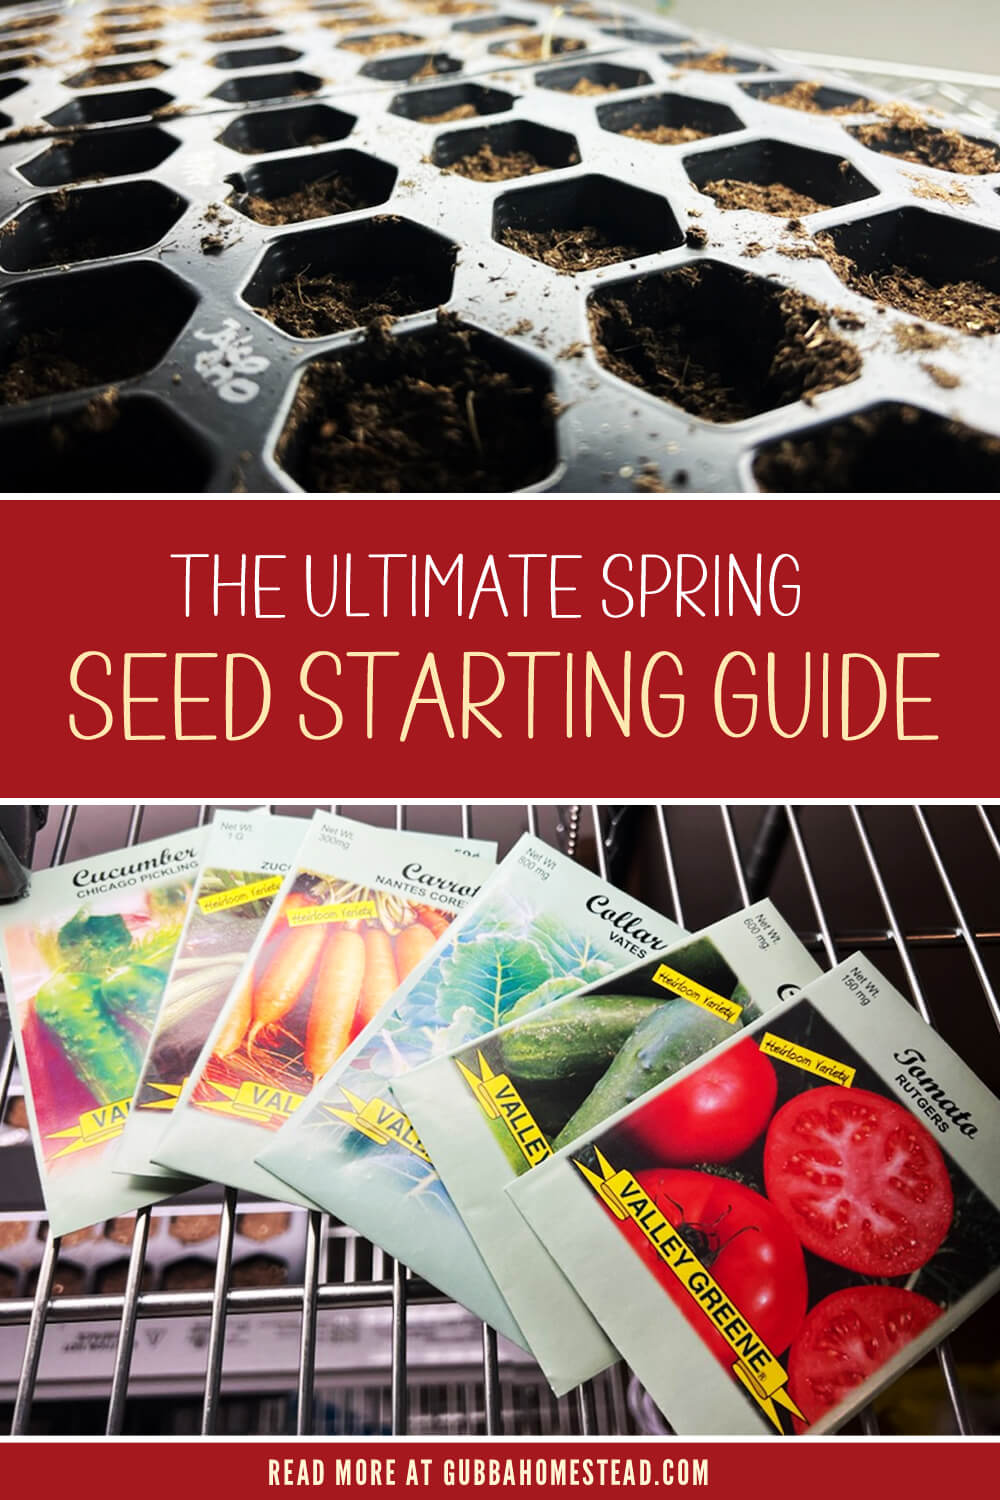 The Ultimate Spring Seed Starting Guide